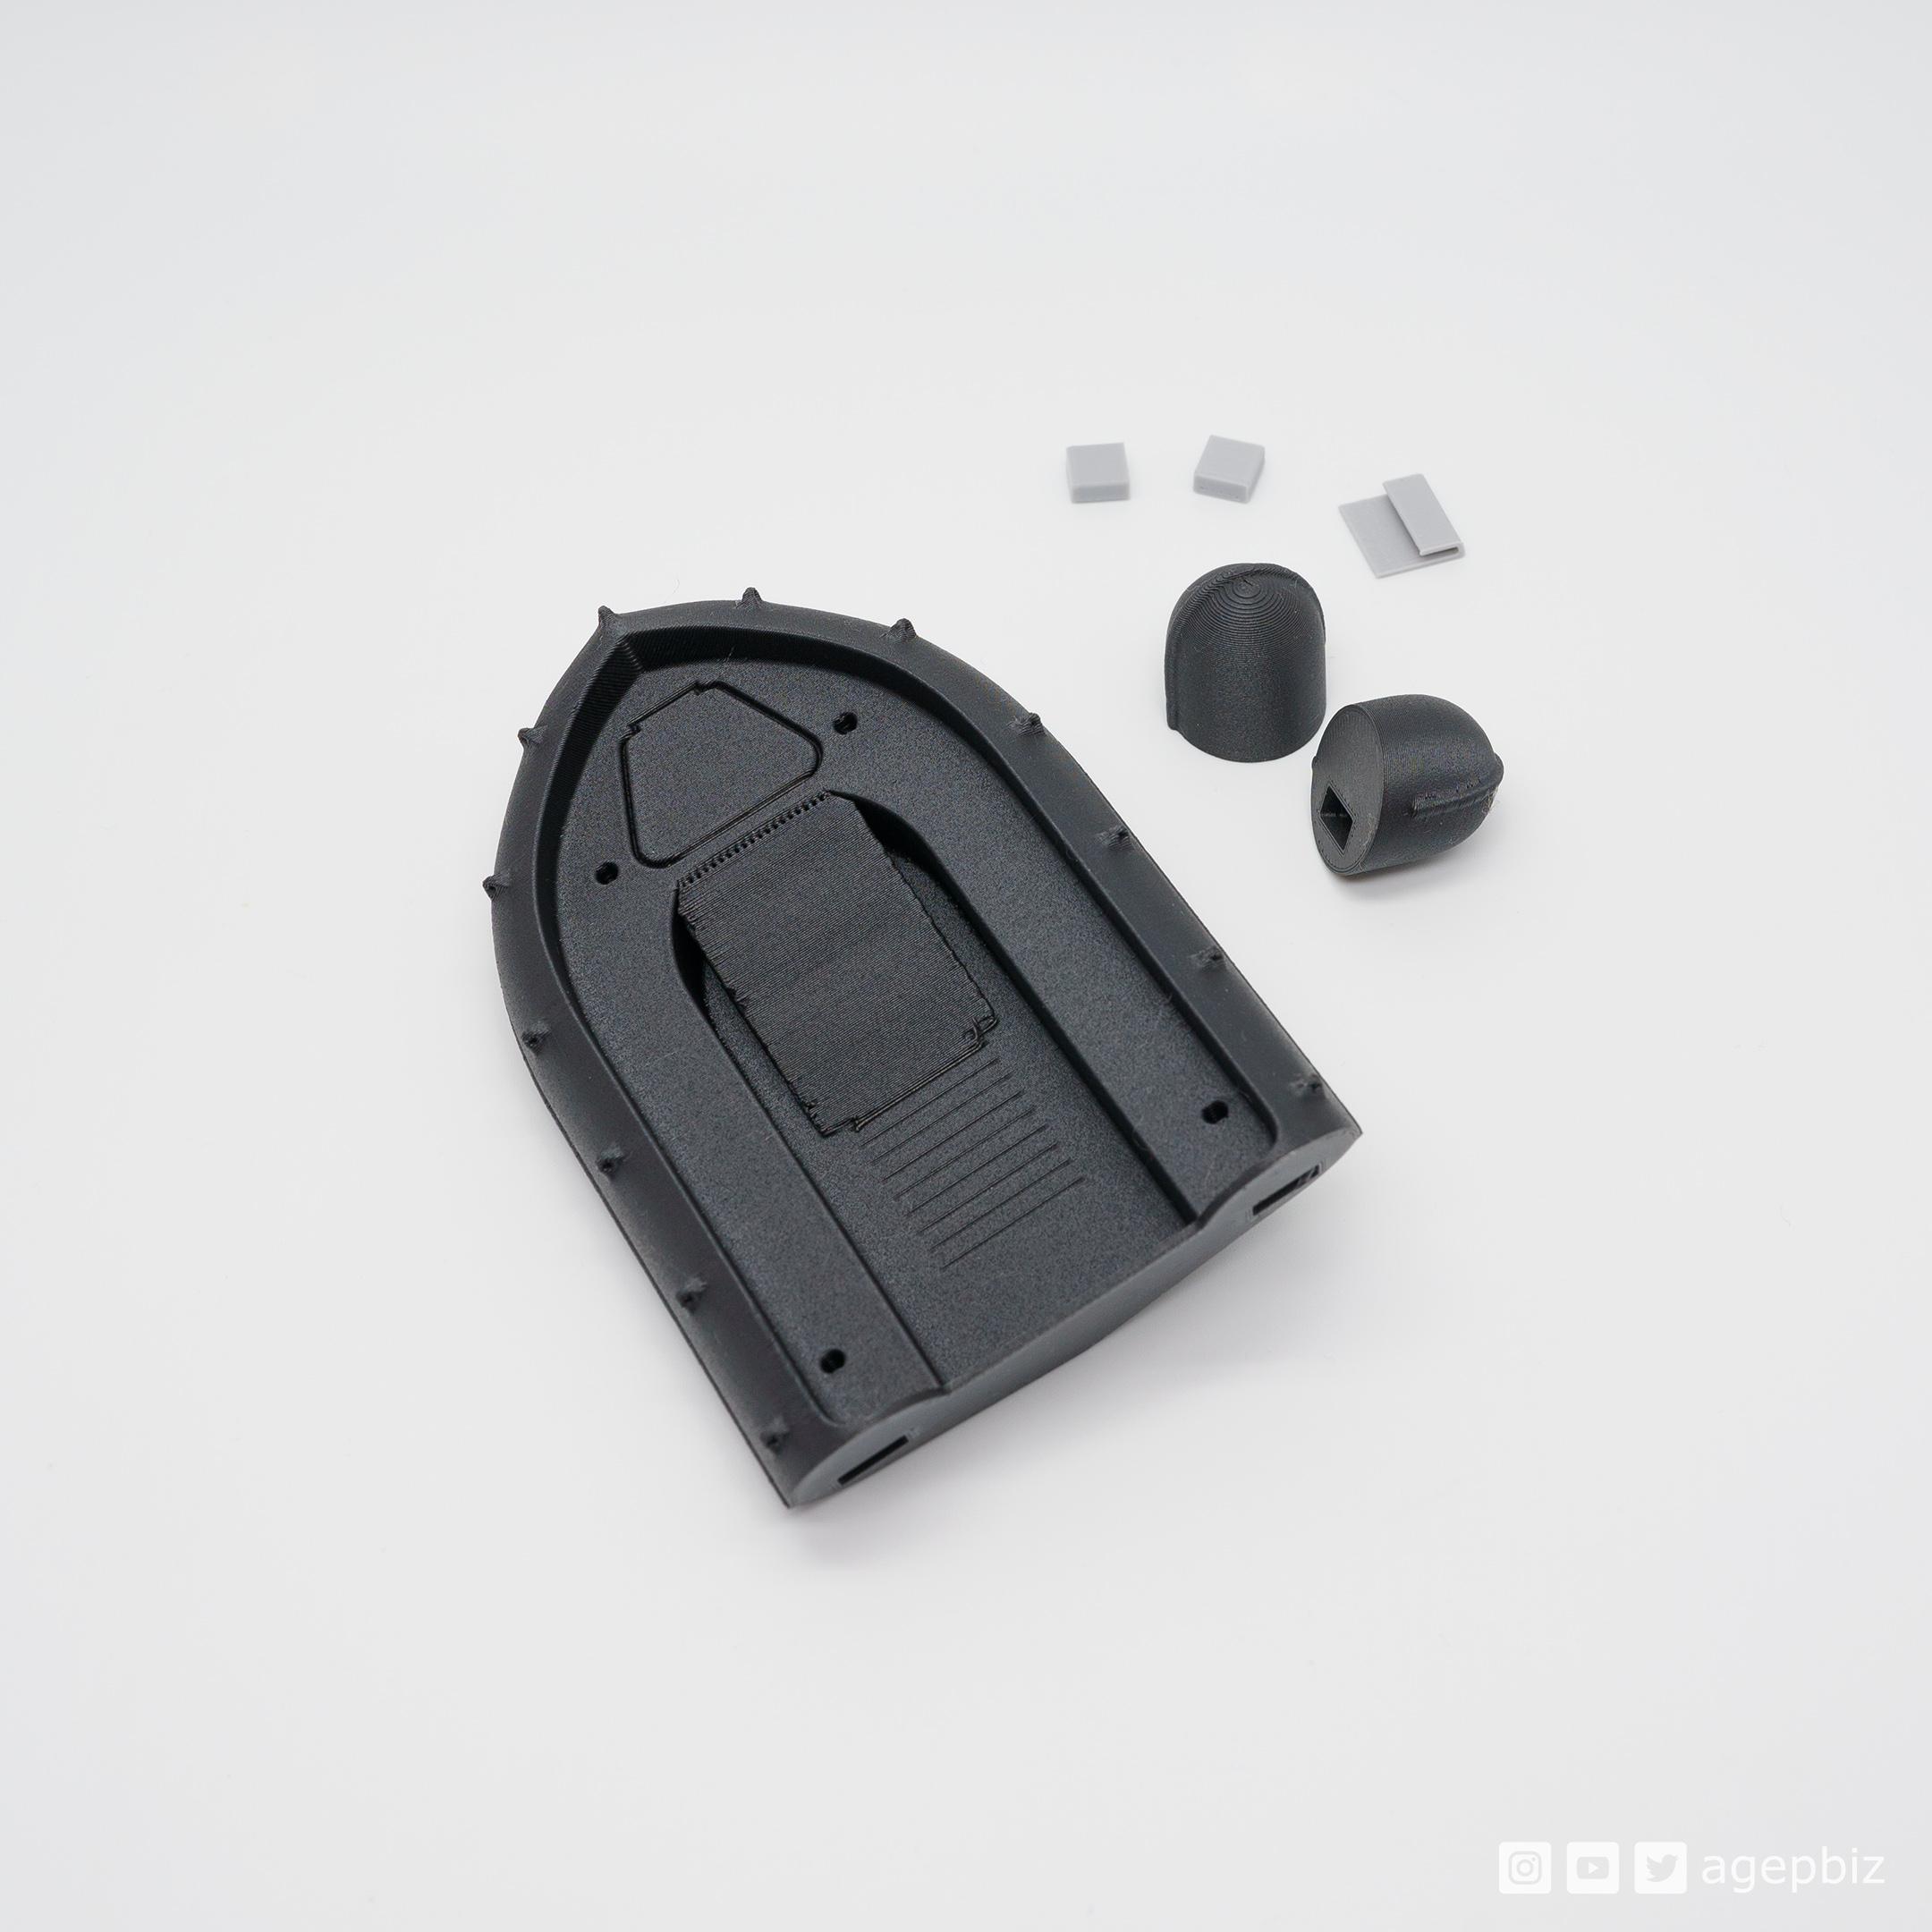 1:25 scale boat for the Bathtub 3d model